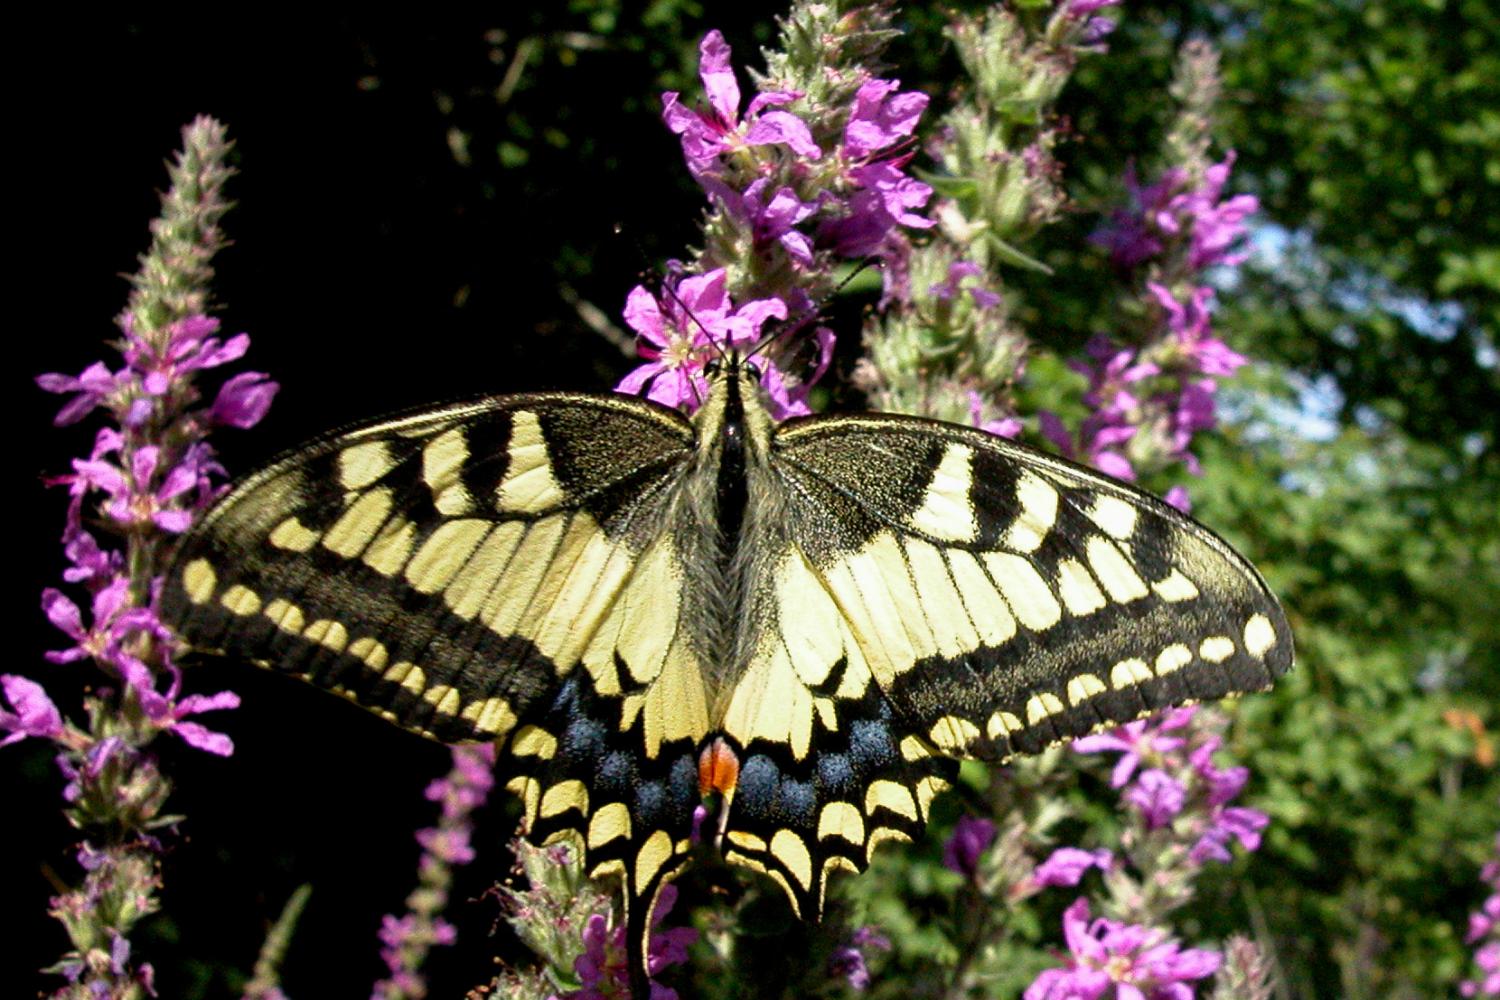 z47_machaon_-_val_charbon_-_21-07-03_4cpoillotte.jpg